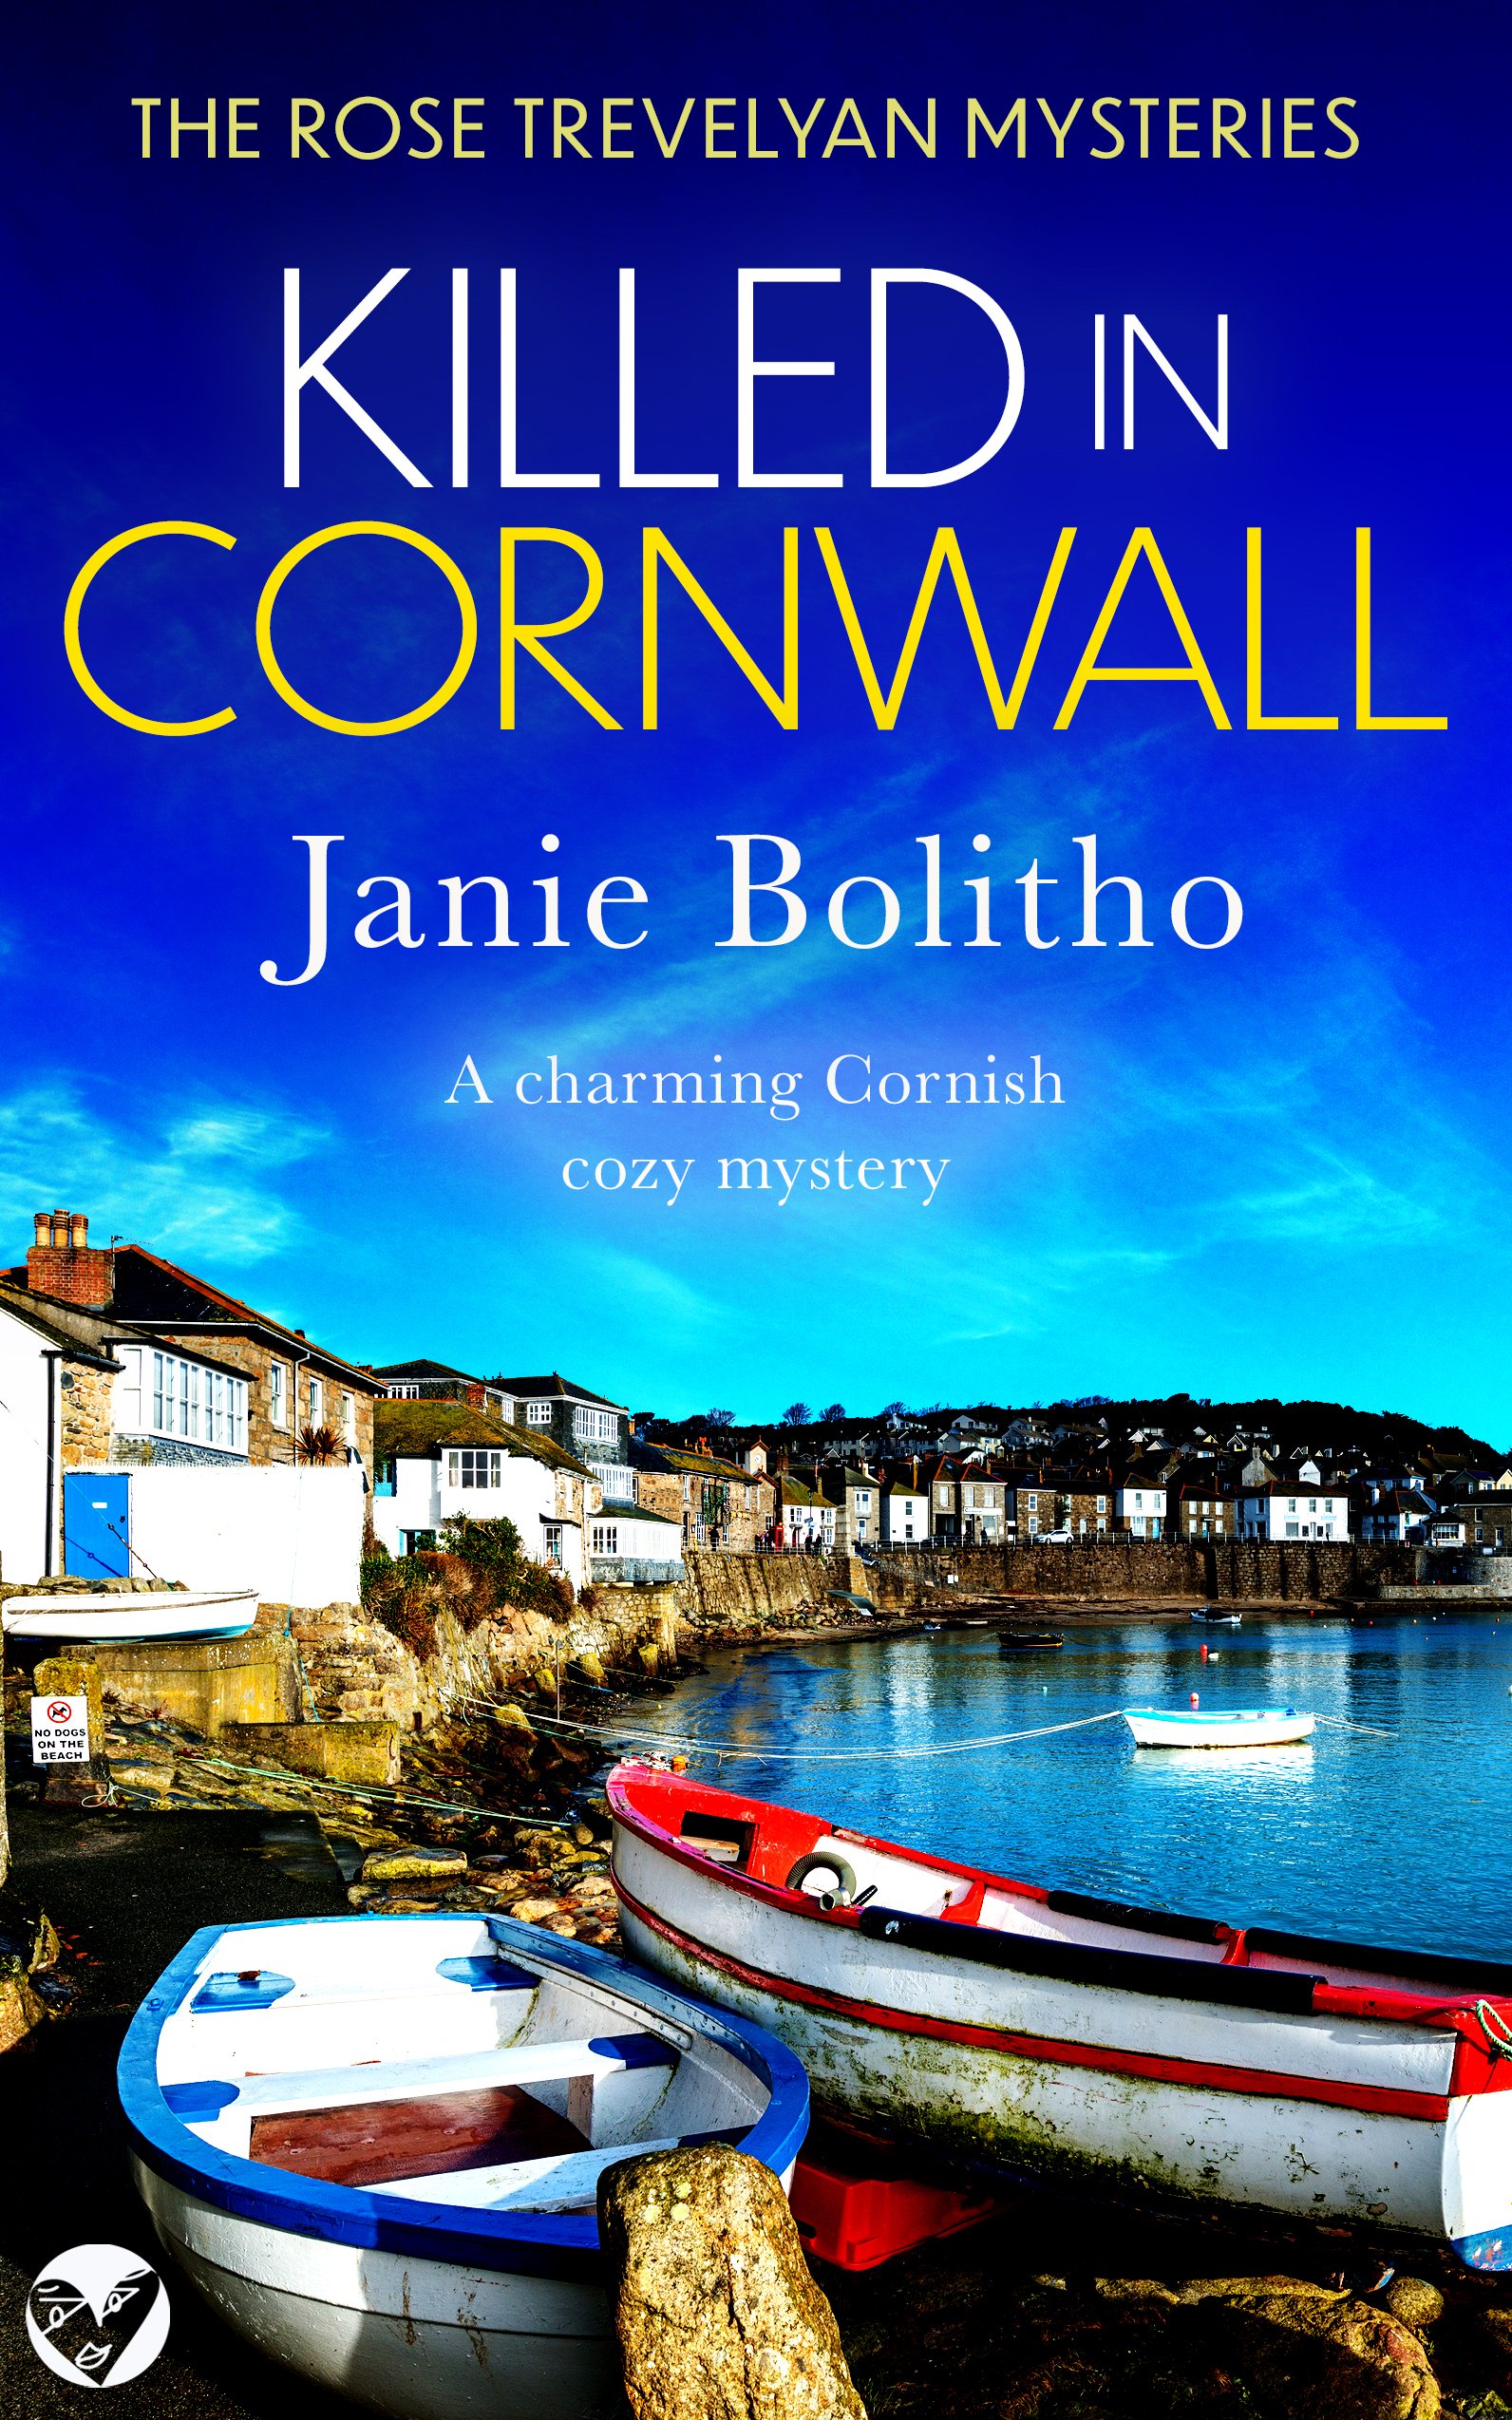 KILLED IN CORNWALL Cover publish.jpg